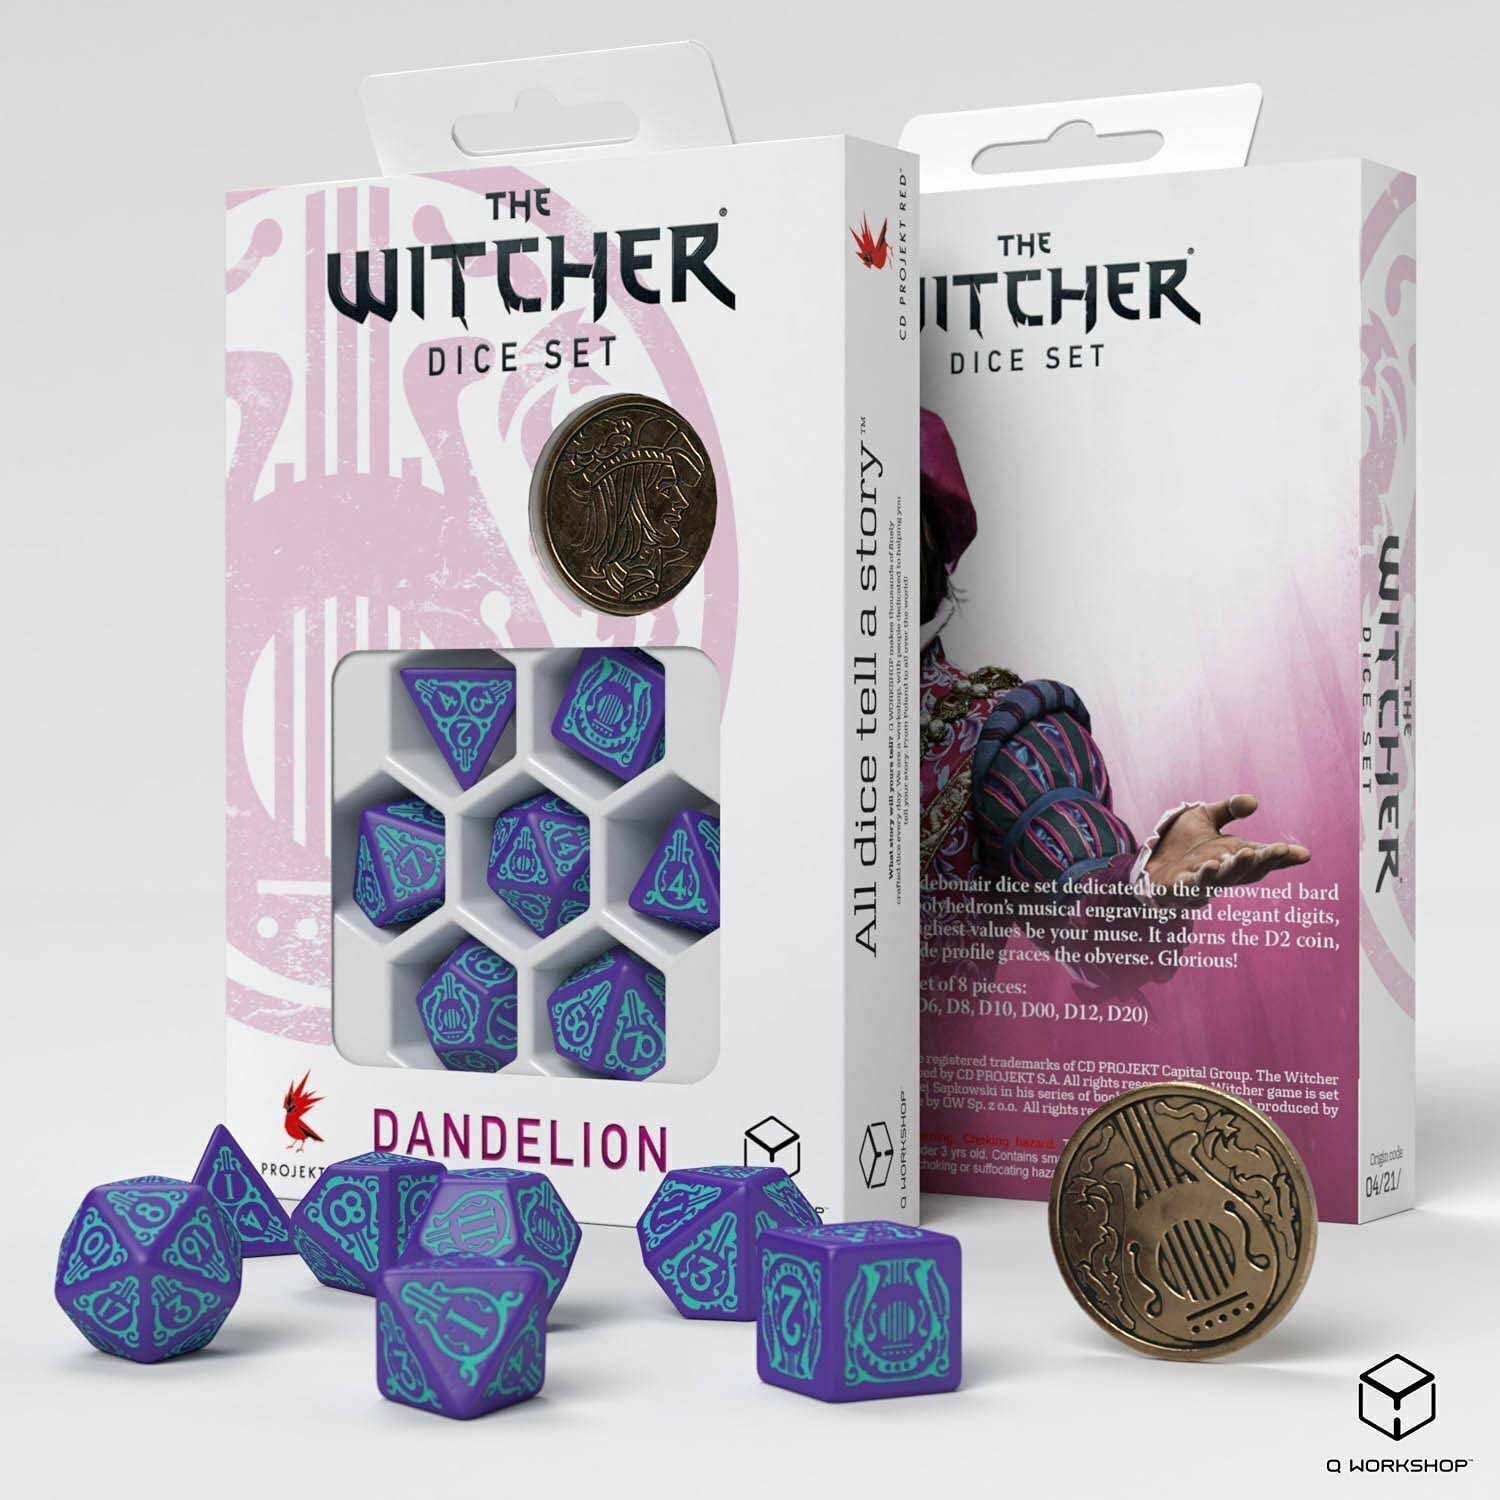 THE WITCHER DICE SET DANDELION CONQUEROR OF HEARTS